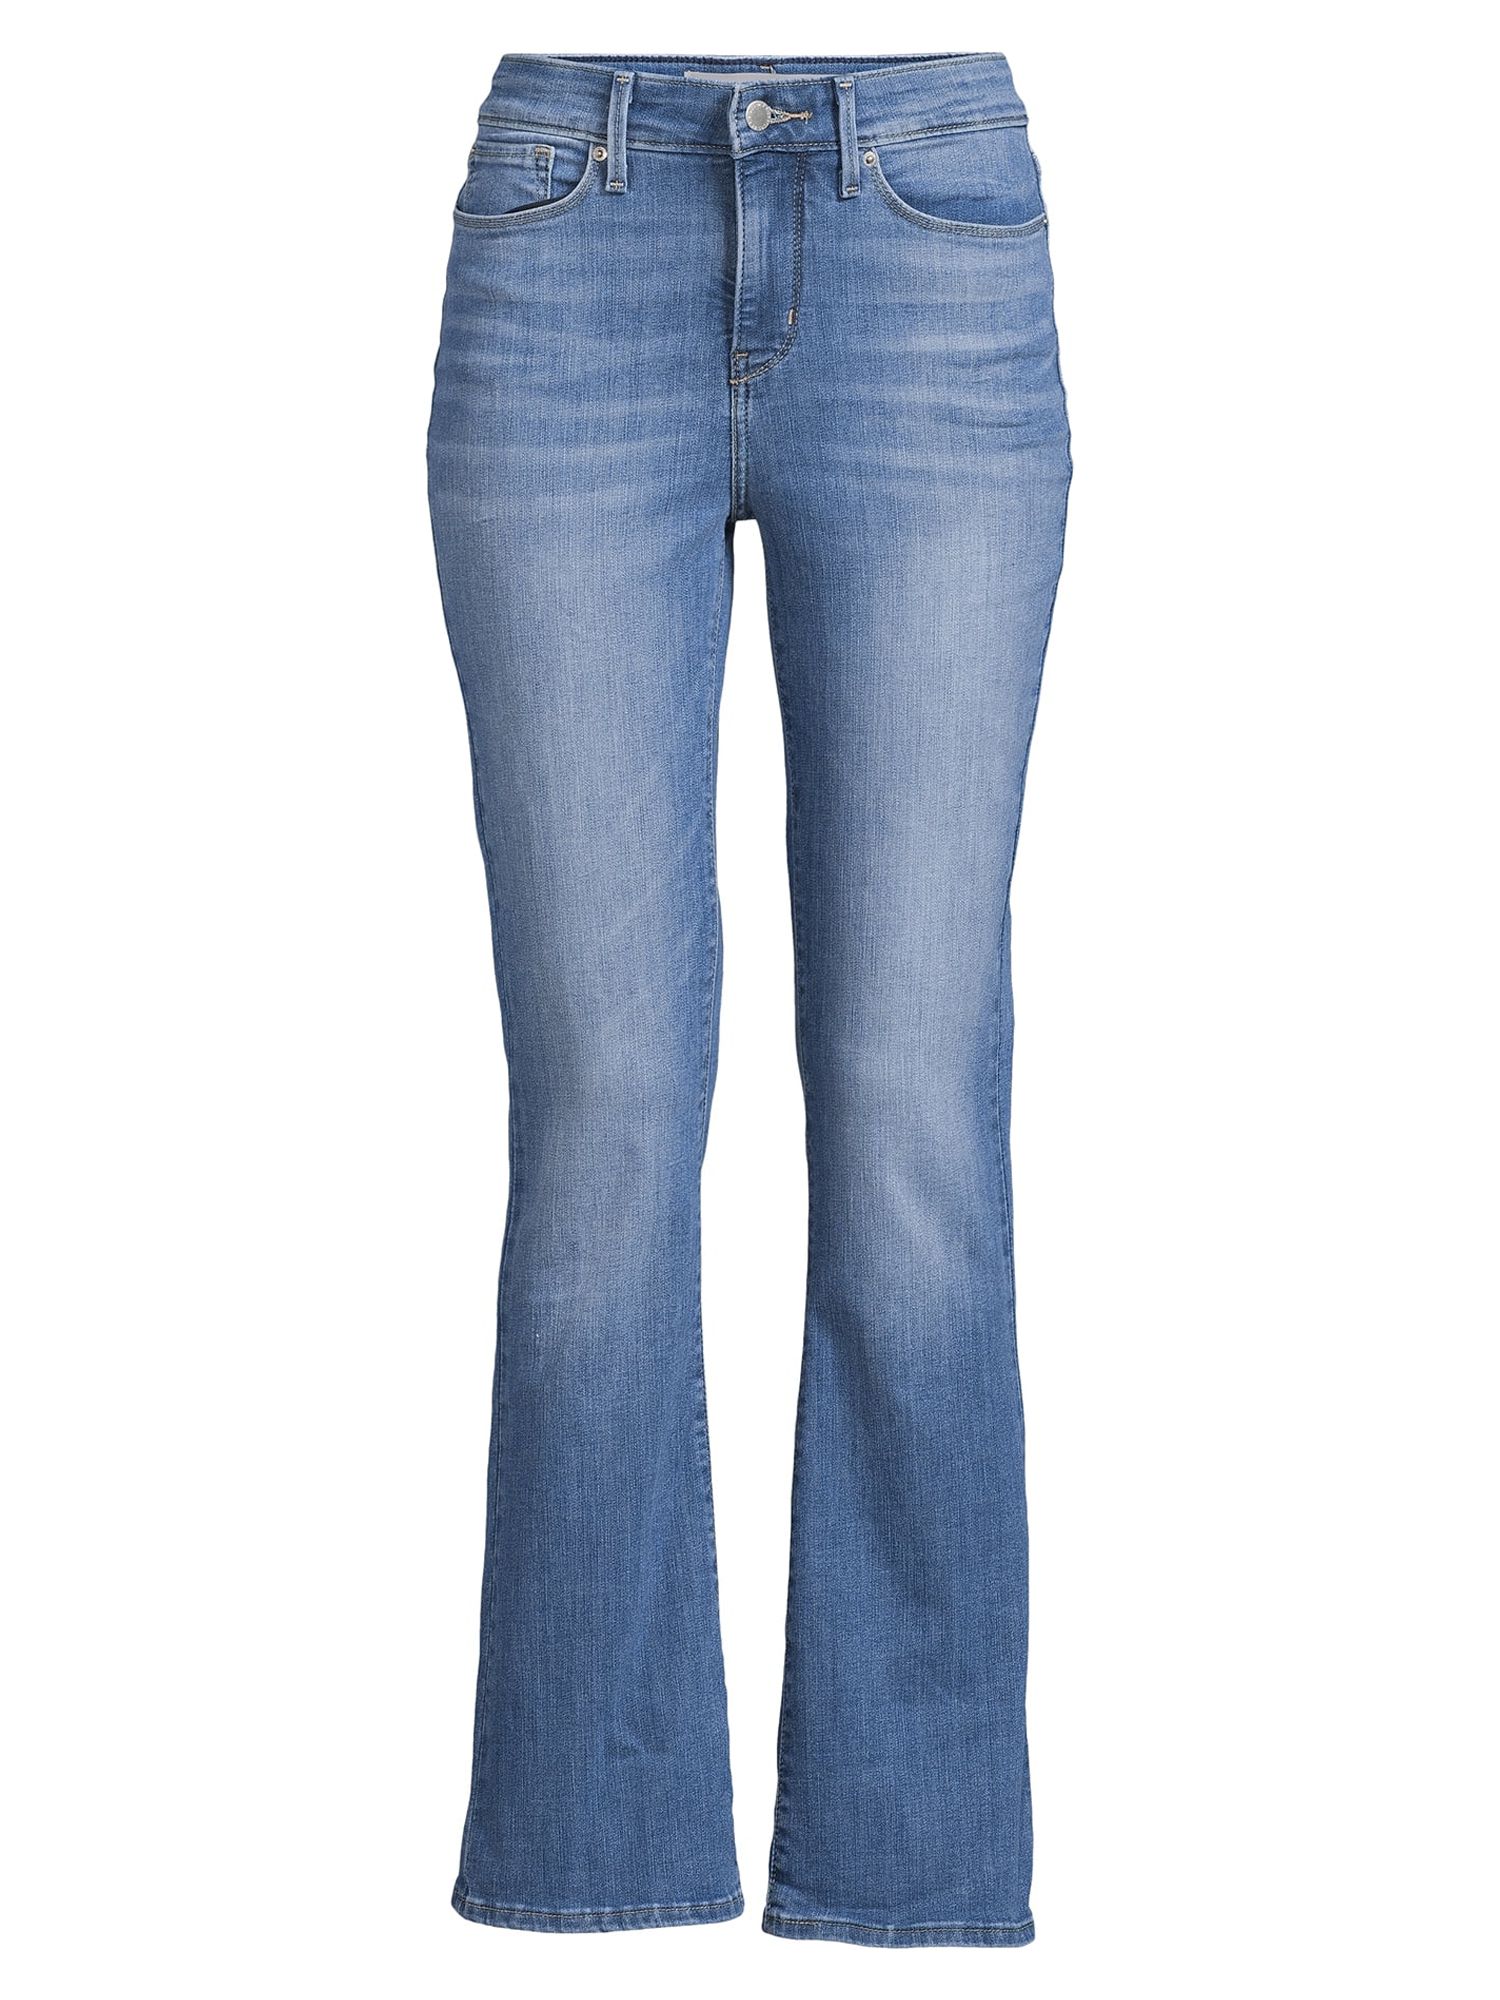 Signature by Levi Strauss & Co. Women's Shaping Mid Rise Bootcut Jeans ...